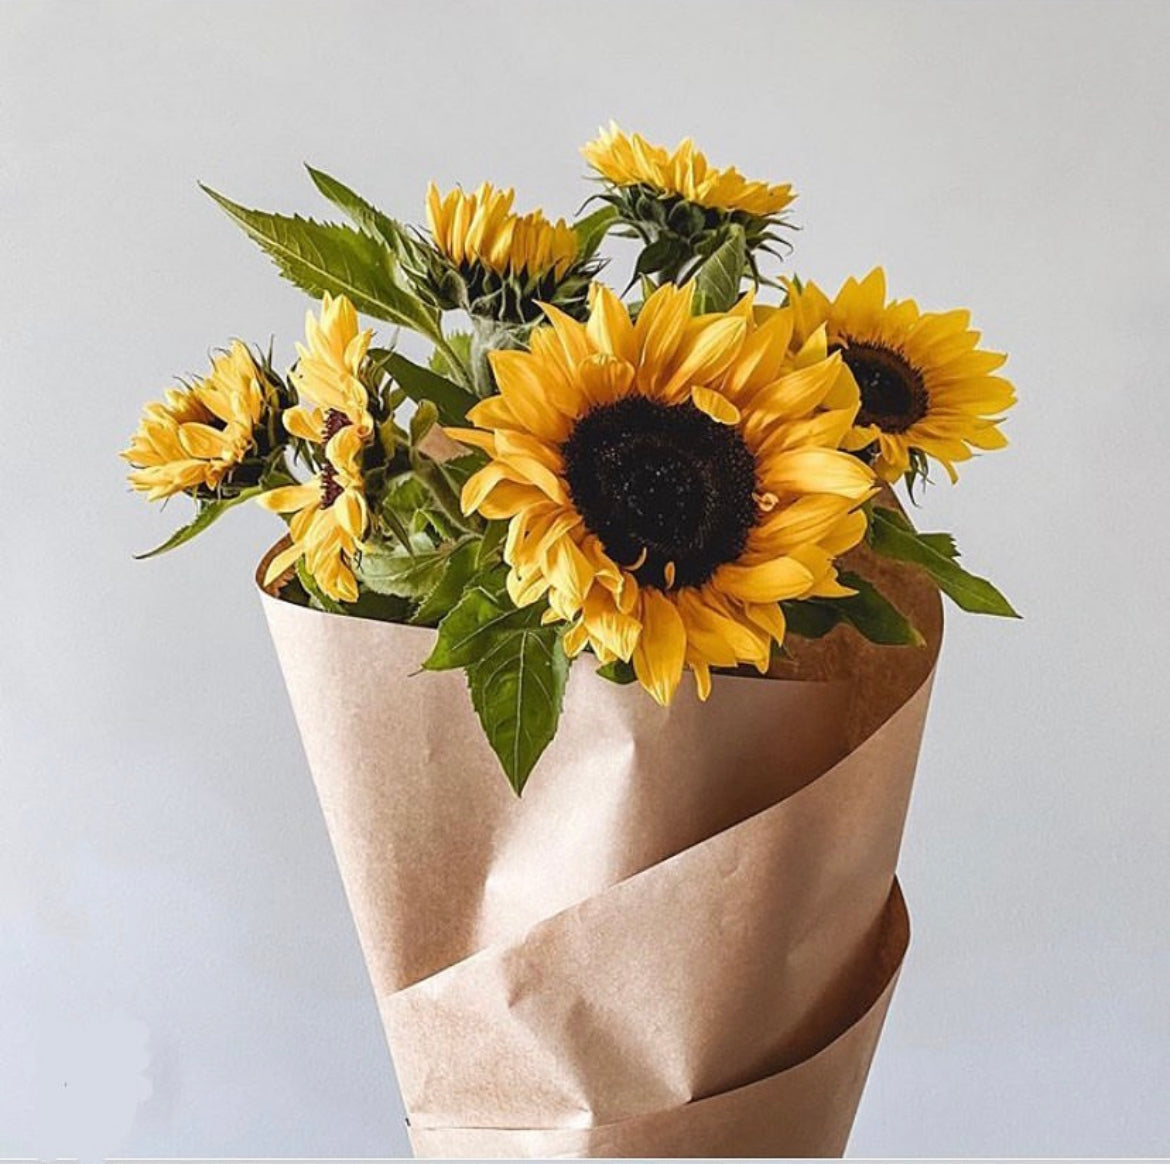 Sunny Sunflowers (1 Bunch) - The Bloom Room 